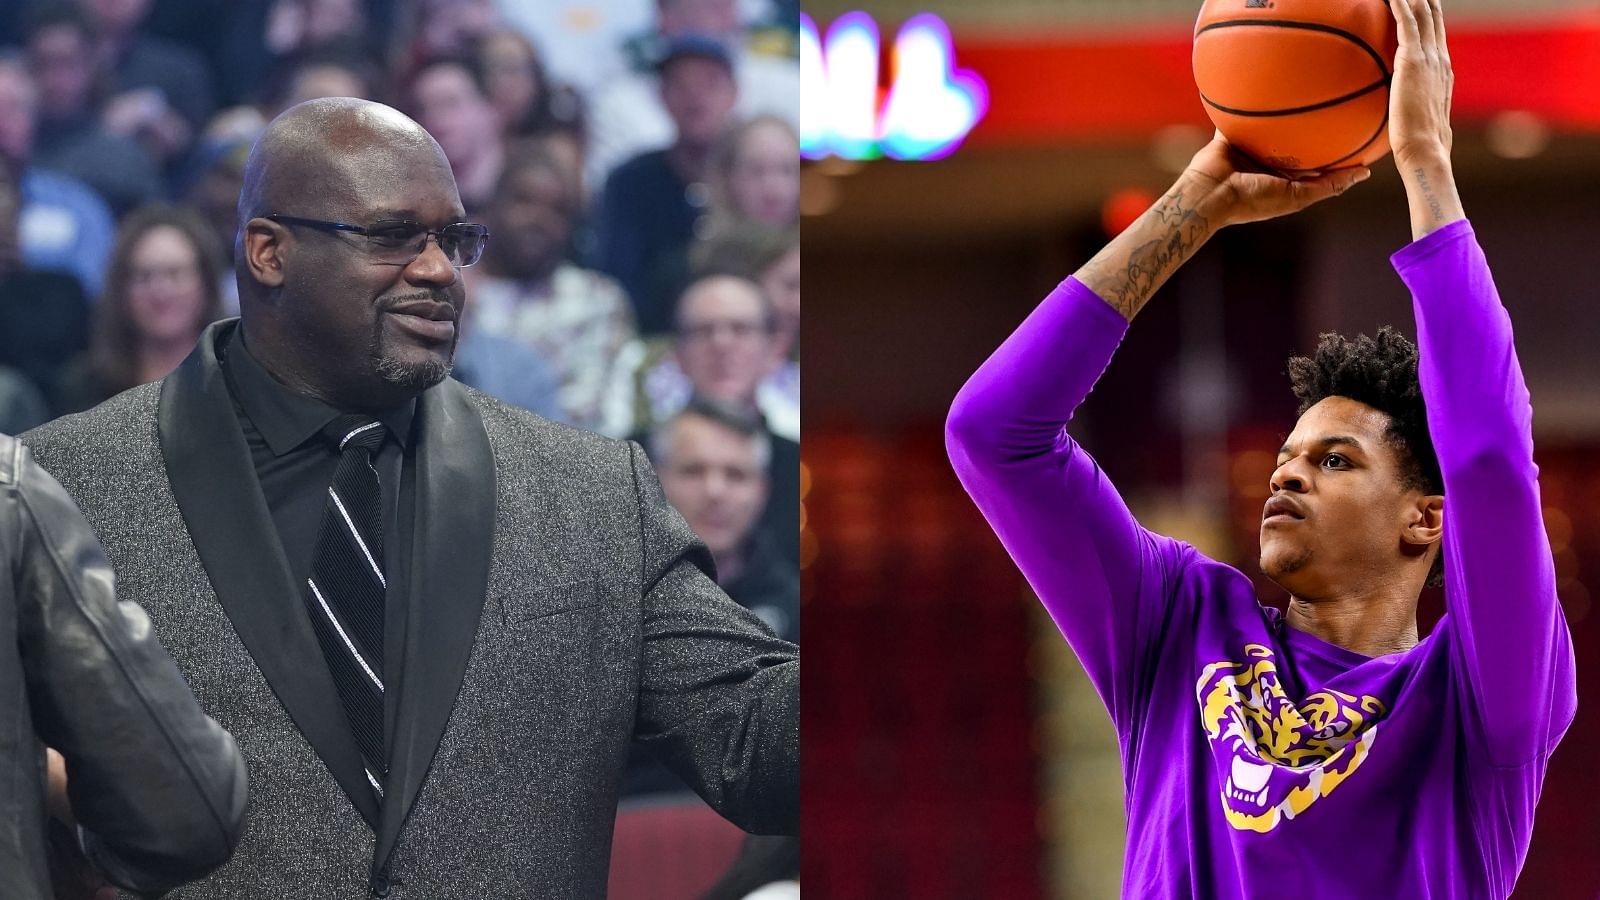 "Shareef O’Neal is Giannis Antetokounmpo with a jump shot": Shaquille O’Neal sets highest of ceilings for his son while the UCLA and LSU forward searches his 3rd college